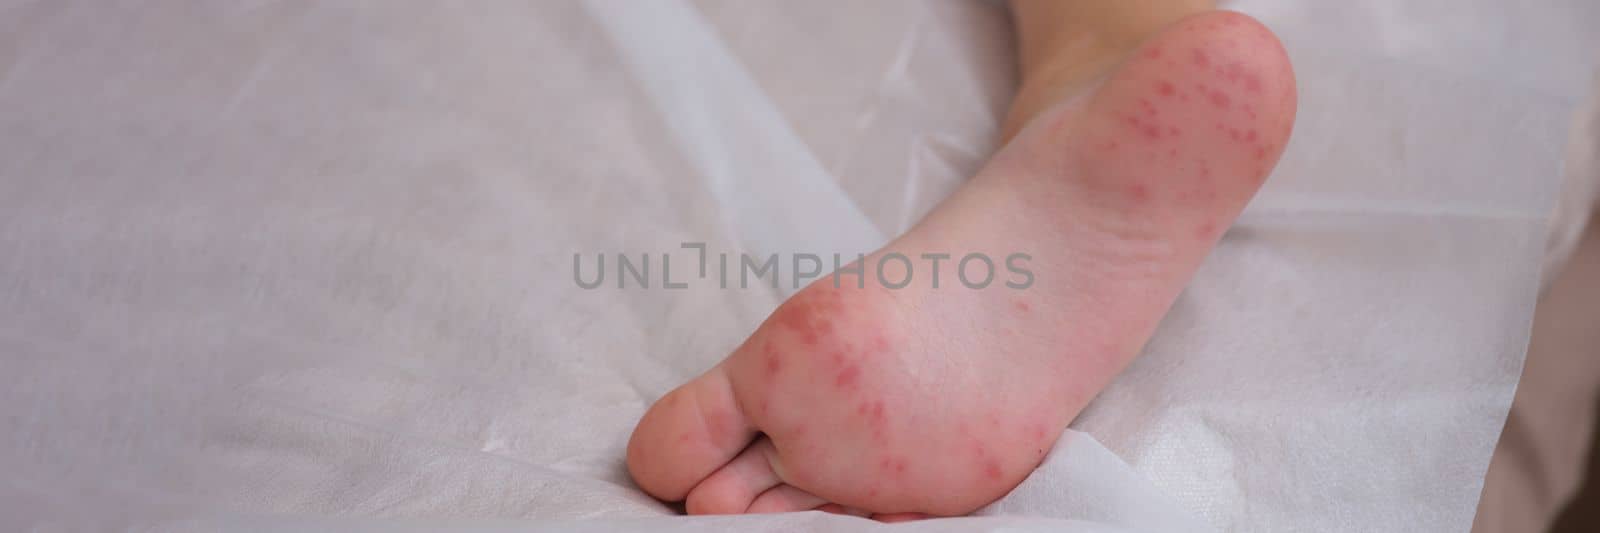 Child foot with red itchy rash closeup by kuprevich